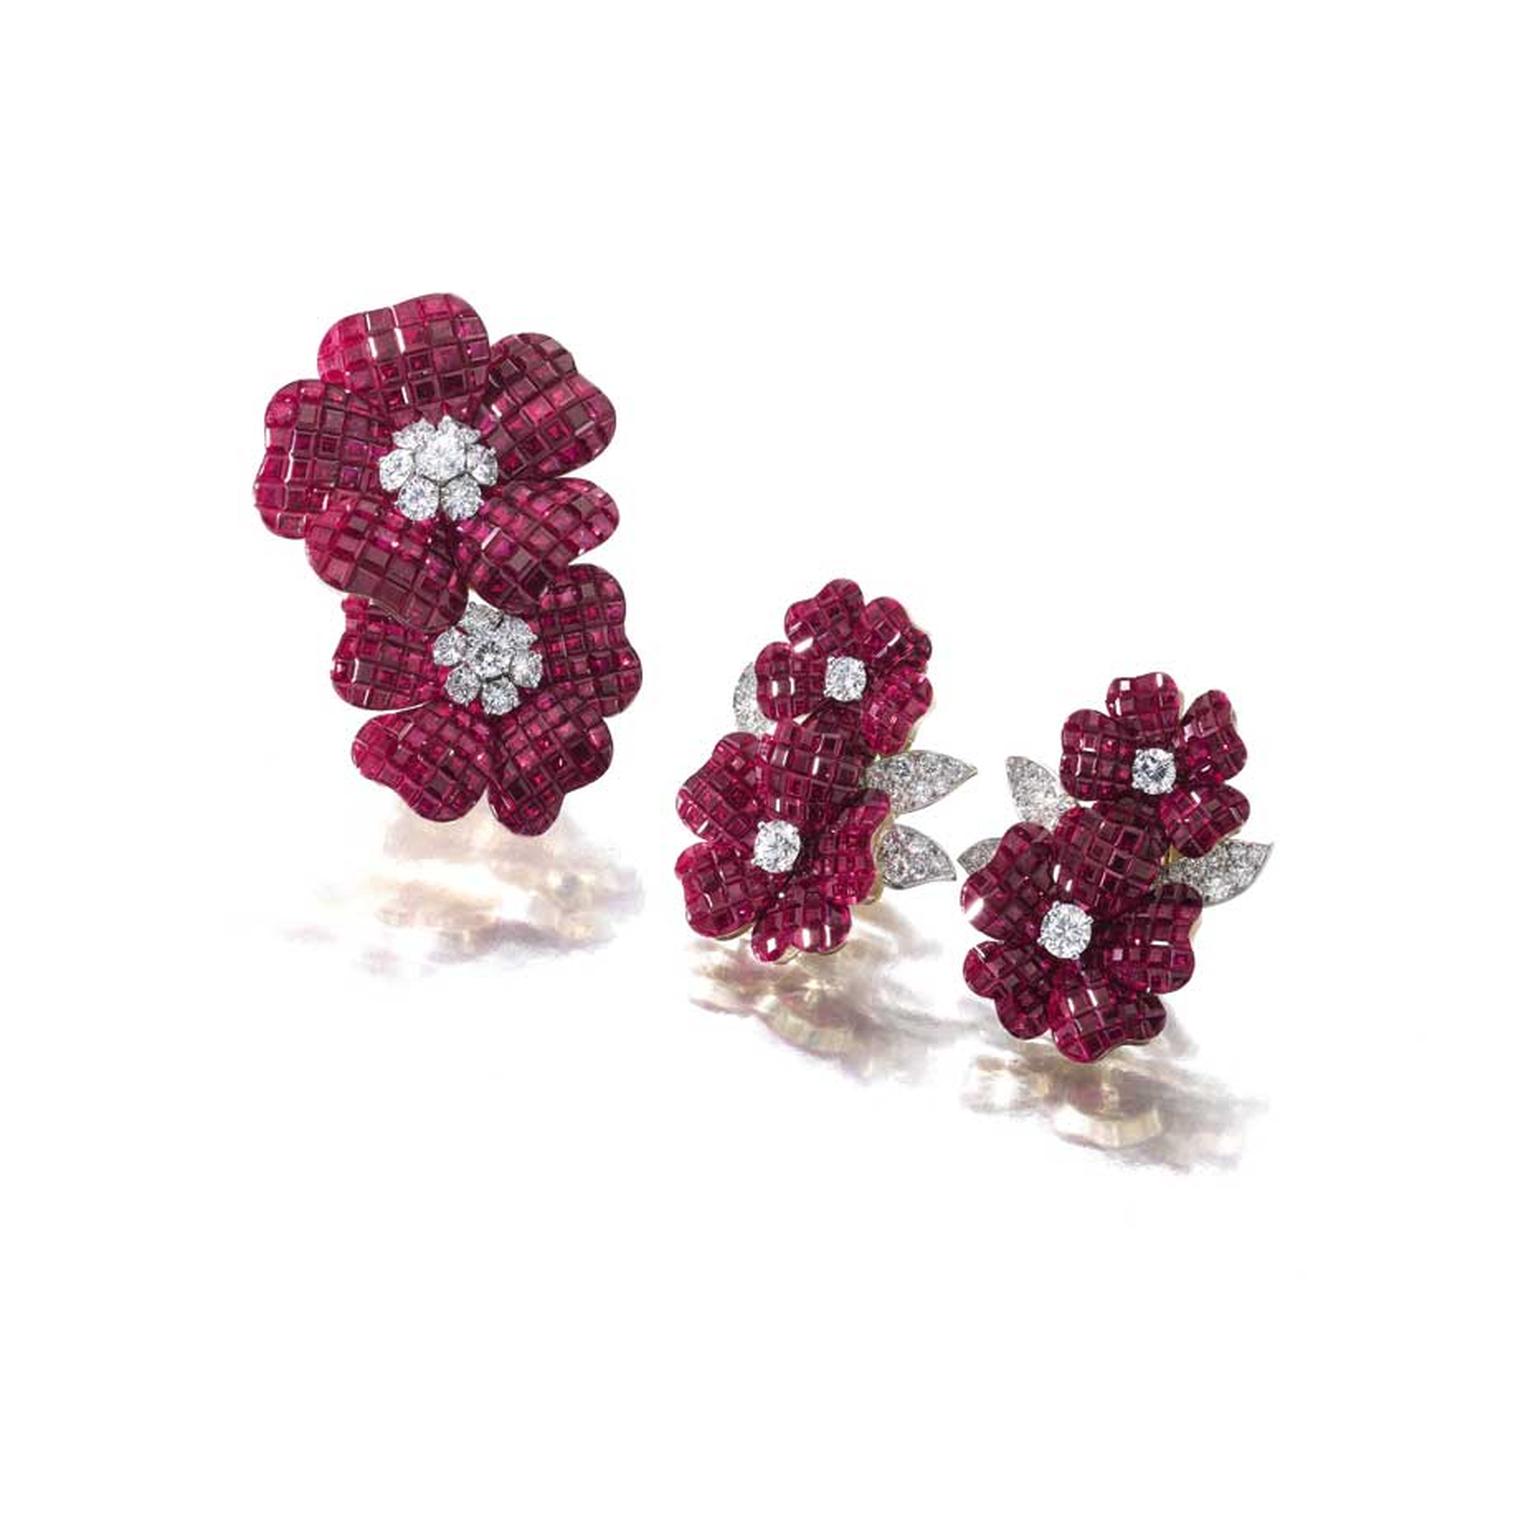 Van Cleef & Arpels ruby and diamond brooch and matching ear clips (brooch estimate: CHF 135,000 - 225,000/$150,000 - 250,000; ear clips estimate: CHF135,000 - 225,000/$150,000 - 250,000)